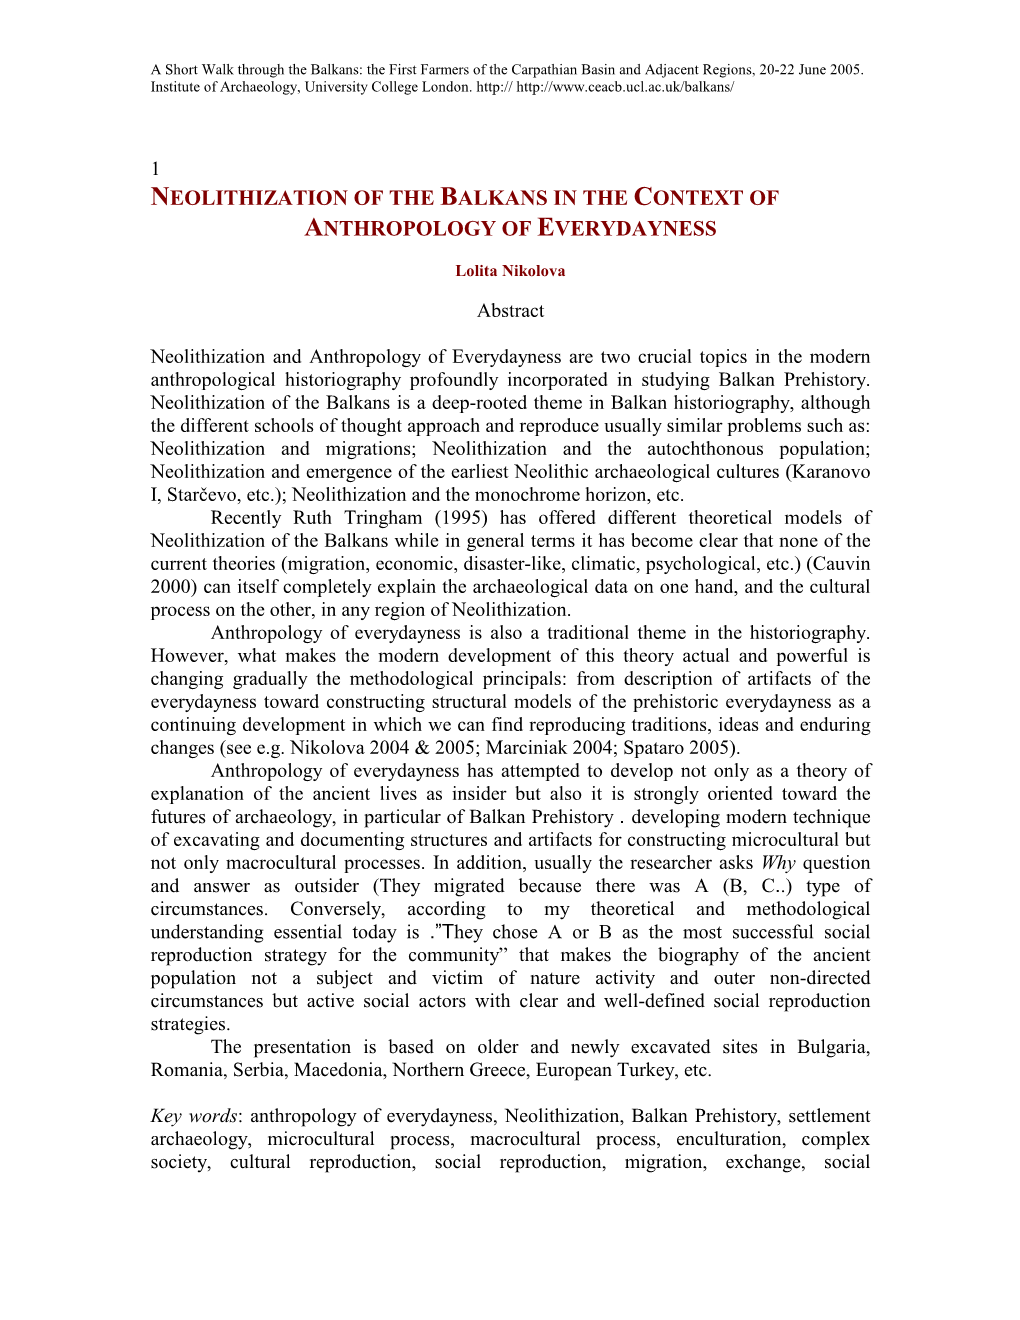 Neolithization of the Balkans in the Context of Anthropology of Everydayness